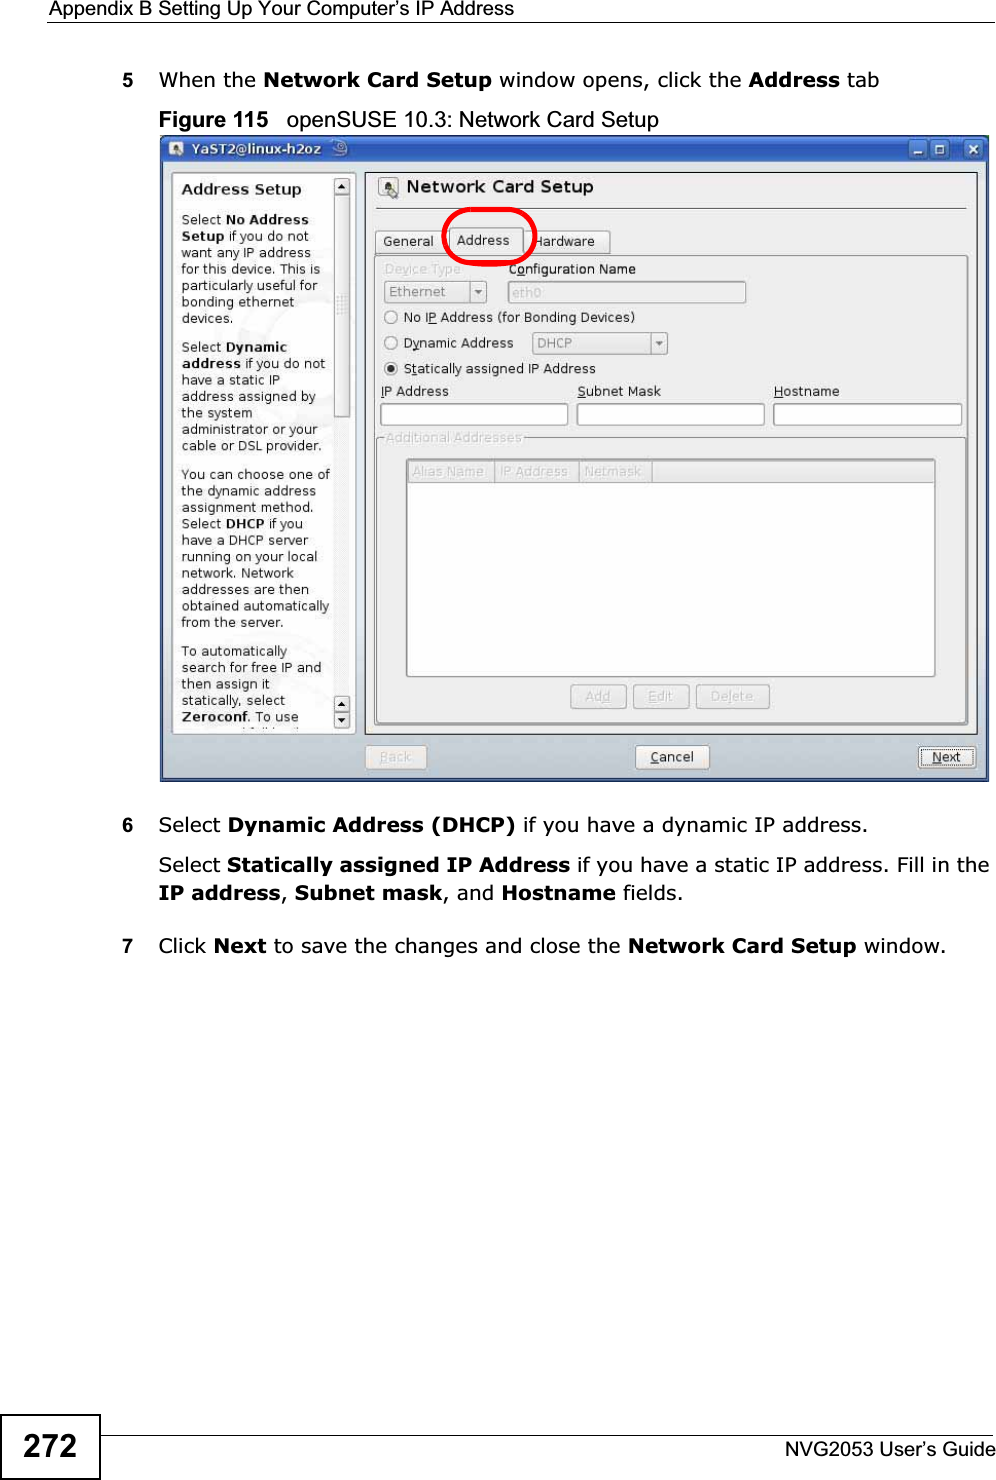 Appendix B Setting Up Your Computer’s IP AddressNVG2053 User’s Guide2725When the Network Card Setup window opens, click the Address tabFigure 115   openSUSE 10.3: Network Card Setup6Select Dynamic Address (DHCP) if you have a dynamic IP address.Select Statically assigned IP Address if you have a static IP address. Fill in the IP address,Subnet mask, and Hostname fields.7Click Next to save the changes and close the Network Card Setup window. 